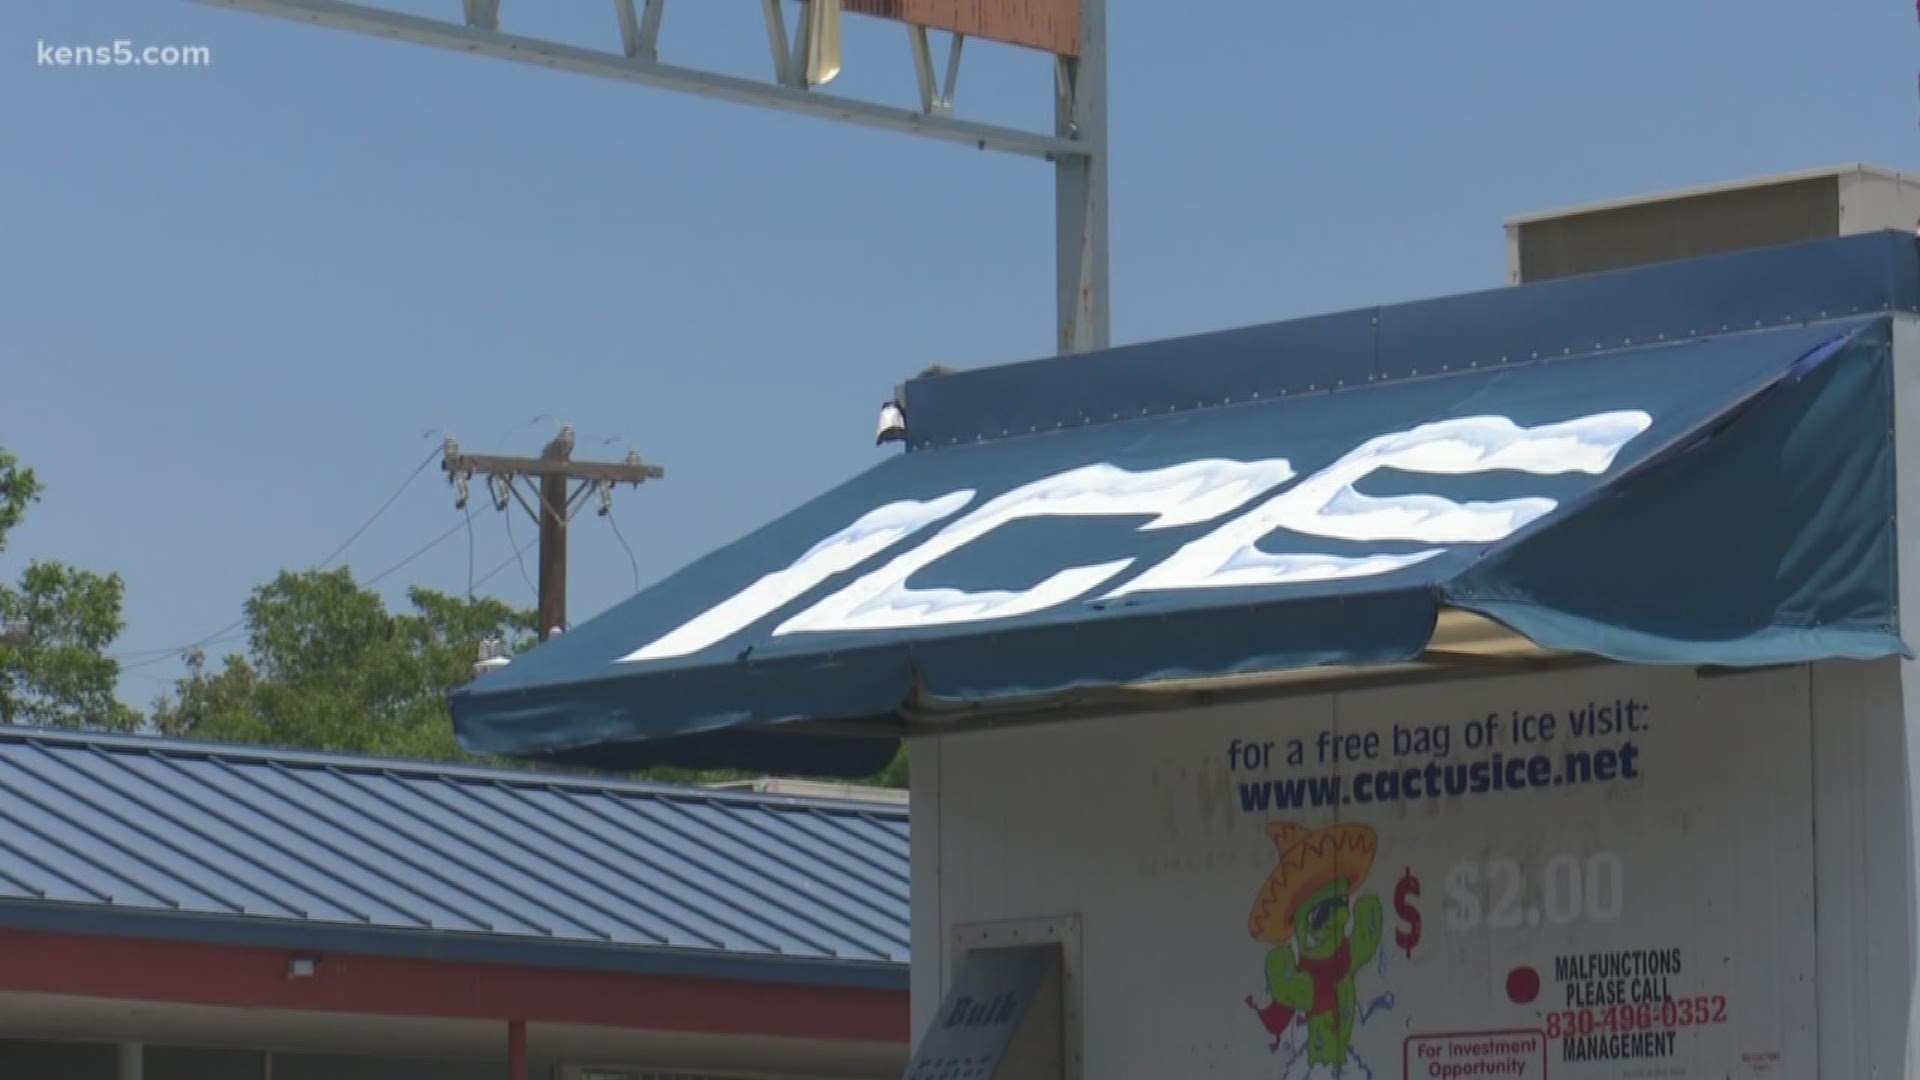 With the heat advisory in effect this weekend there are a lot of ways to beat the heat.Eyewitness News reporter Sue Calberg says you could go get a raspa, or you could rely on her grandma's secret recipe.